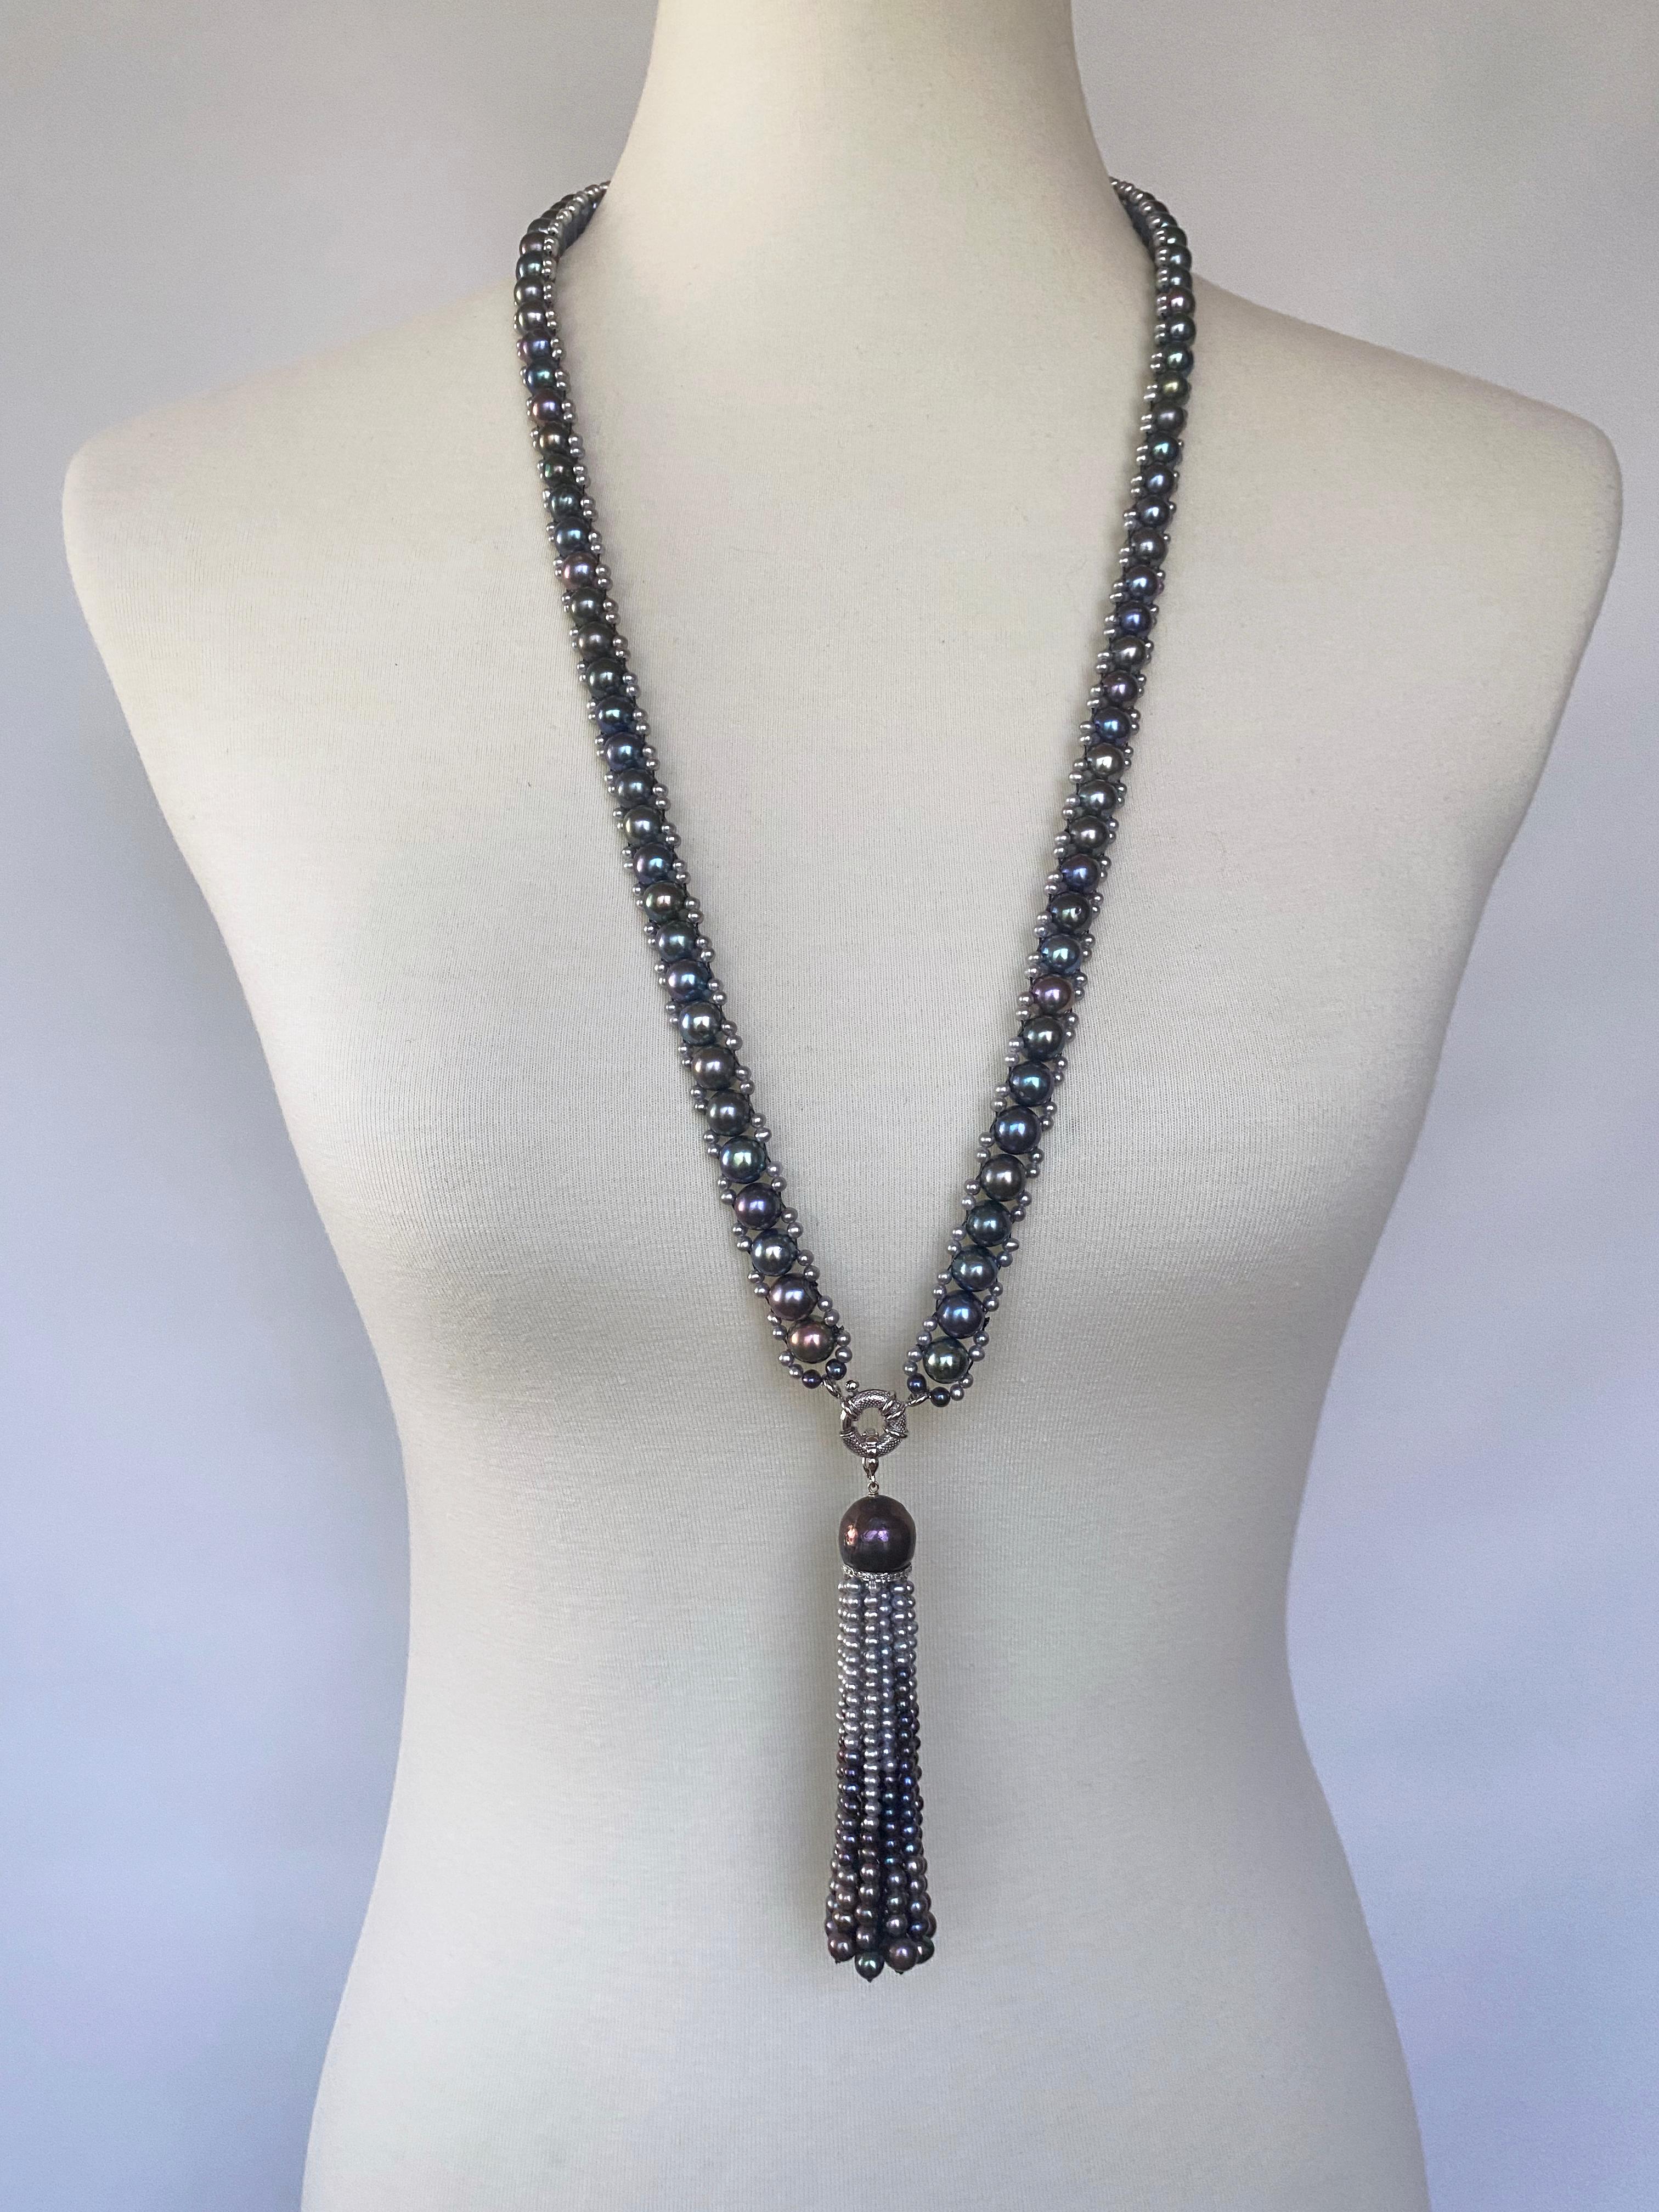 Classic Lariat by Marina J. This gorgeous Lariat features all Black and Grey Pearls hand woven together into a beautiful column like design. The Black Pearls in this piece display a wild iridescence, giving an 